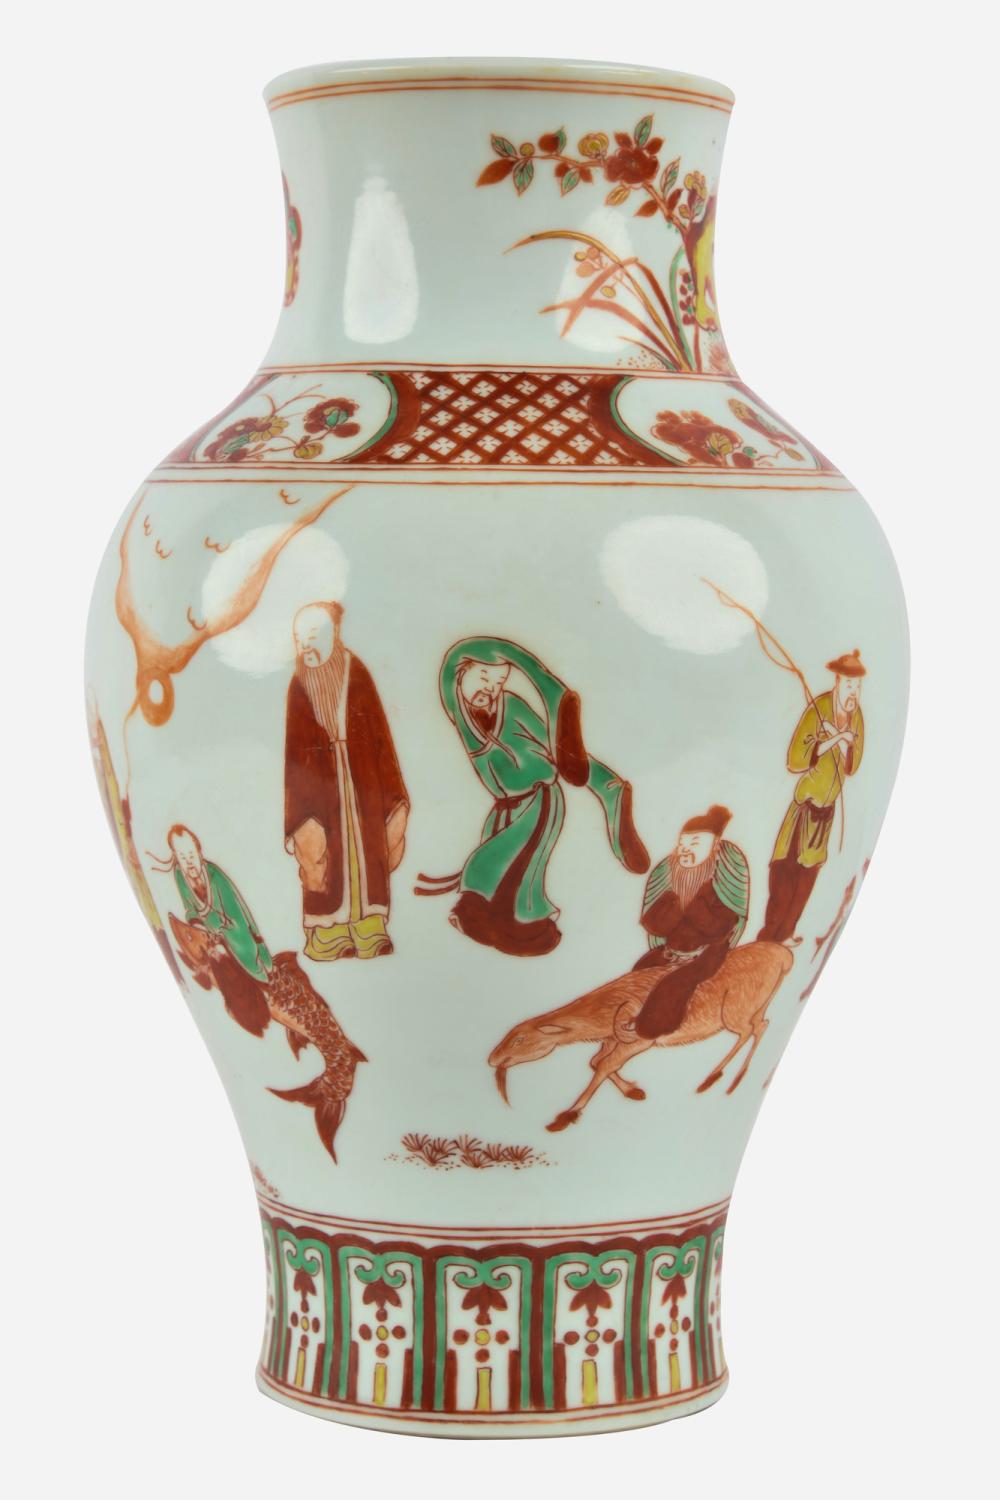 POLYCHROME CHINESE VASEwith six